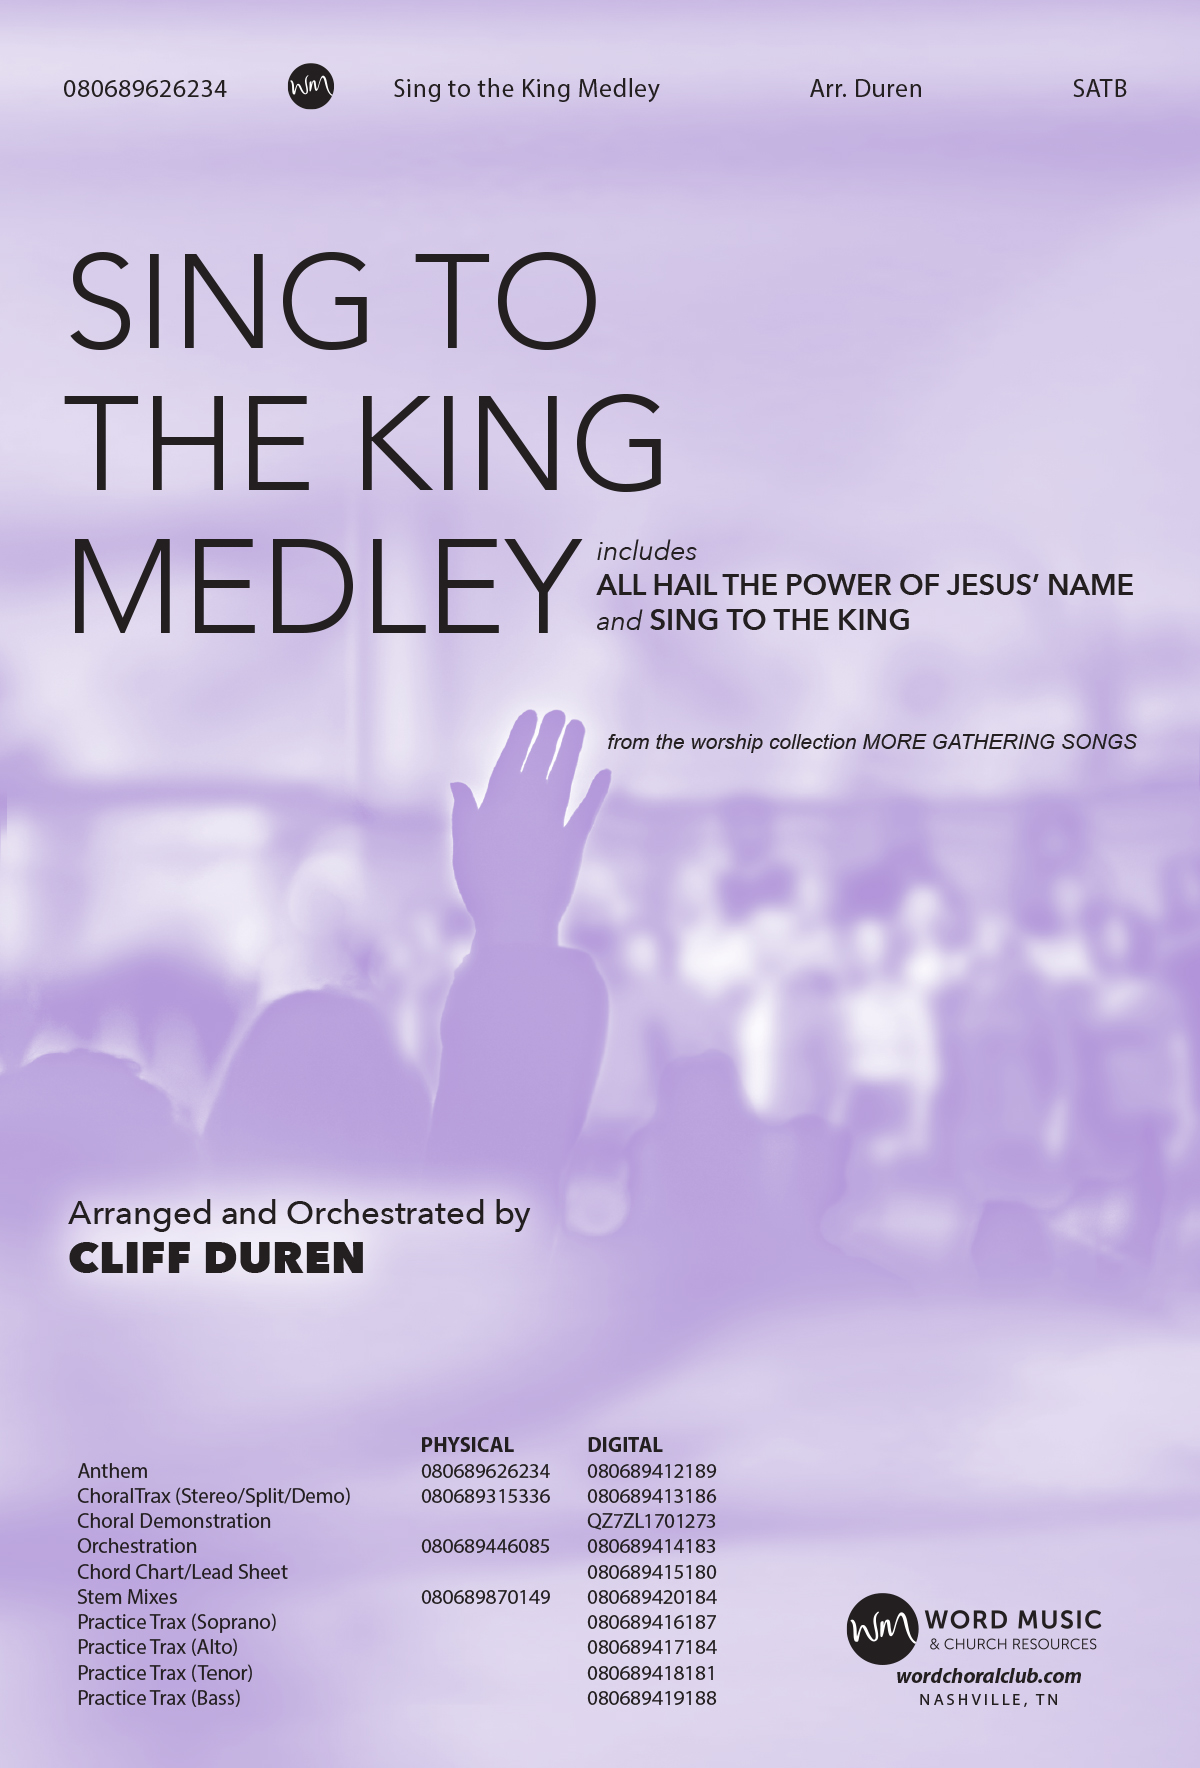 Sing to the King Medley